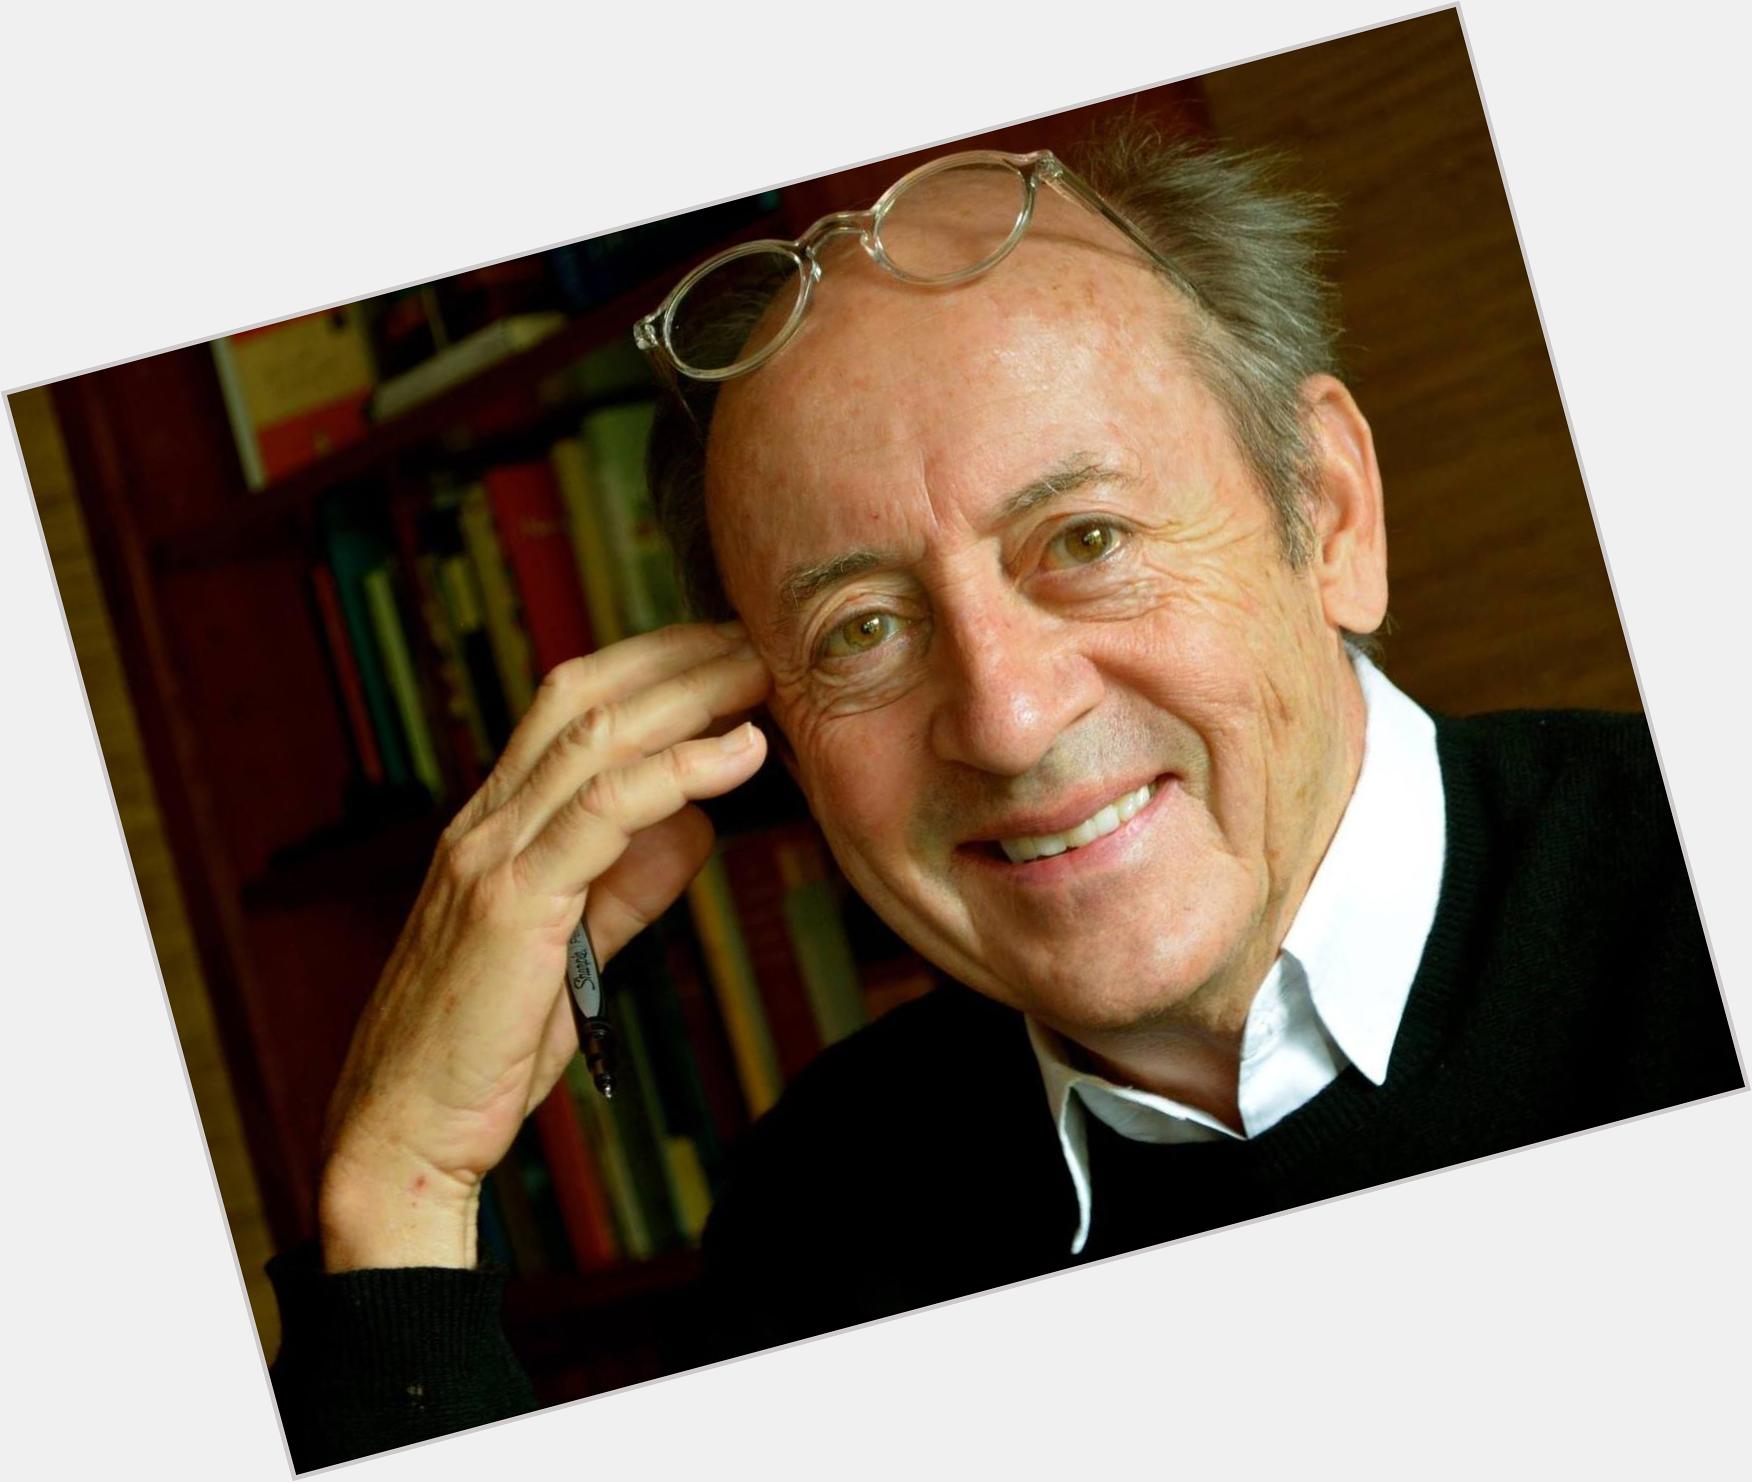 <a href="/hot-men/billy-collins/is-he-married-divorced-still-alive-religious-sonnet">Billy Collins</a> Slim body,  bald hair & hairstyles